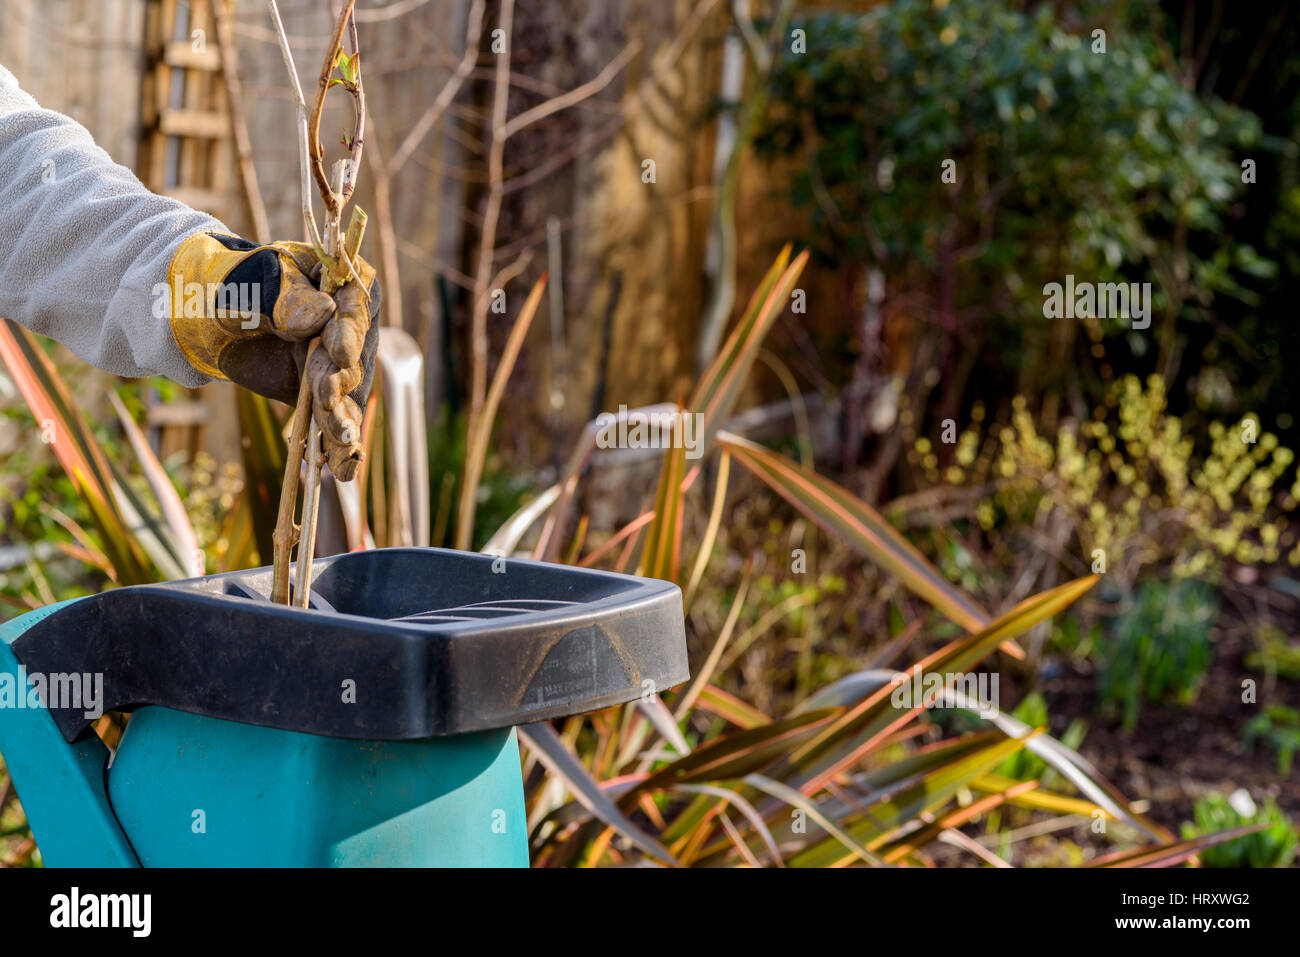 Man using garden shredder. Wearing gloves to protect hands as a safety precaution. Stock Photo